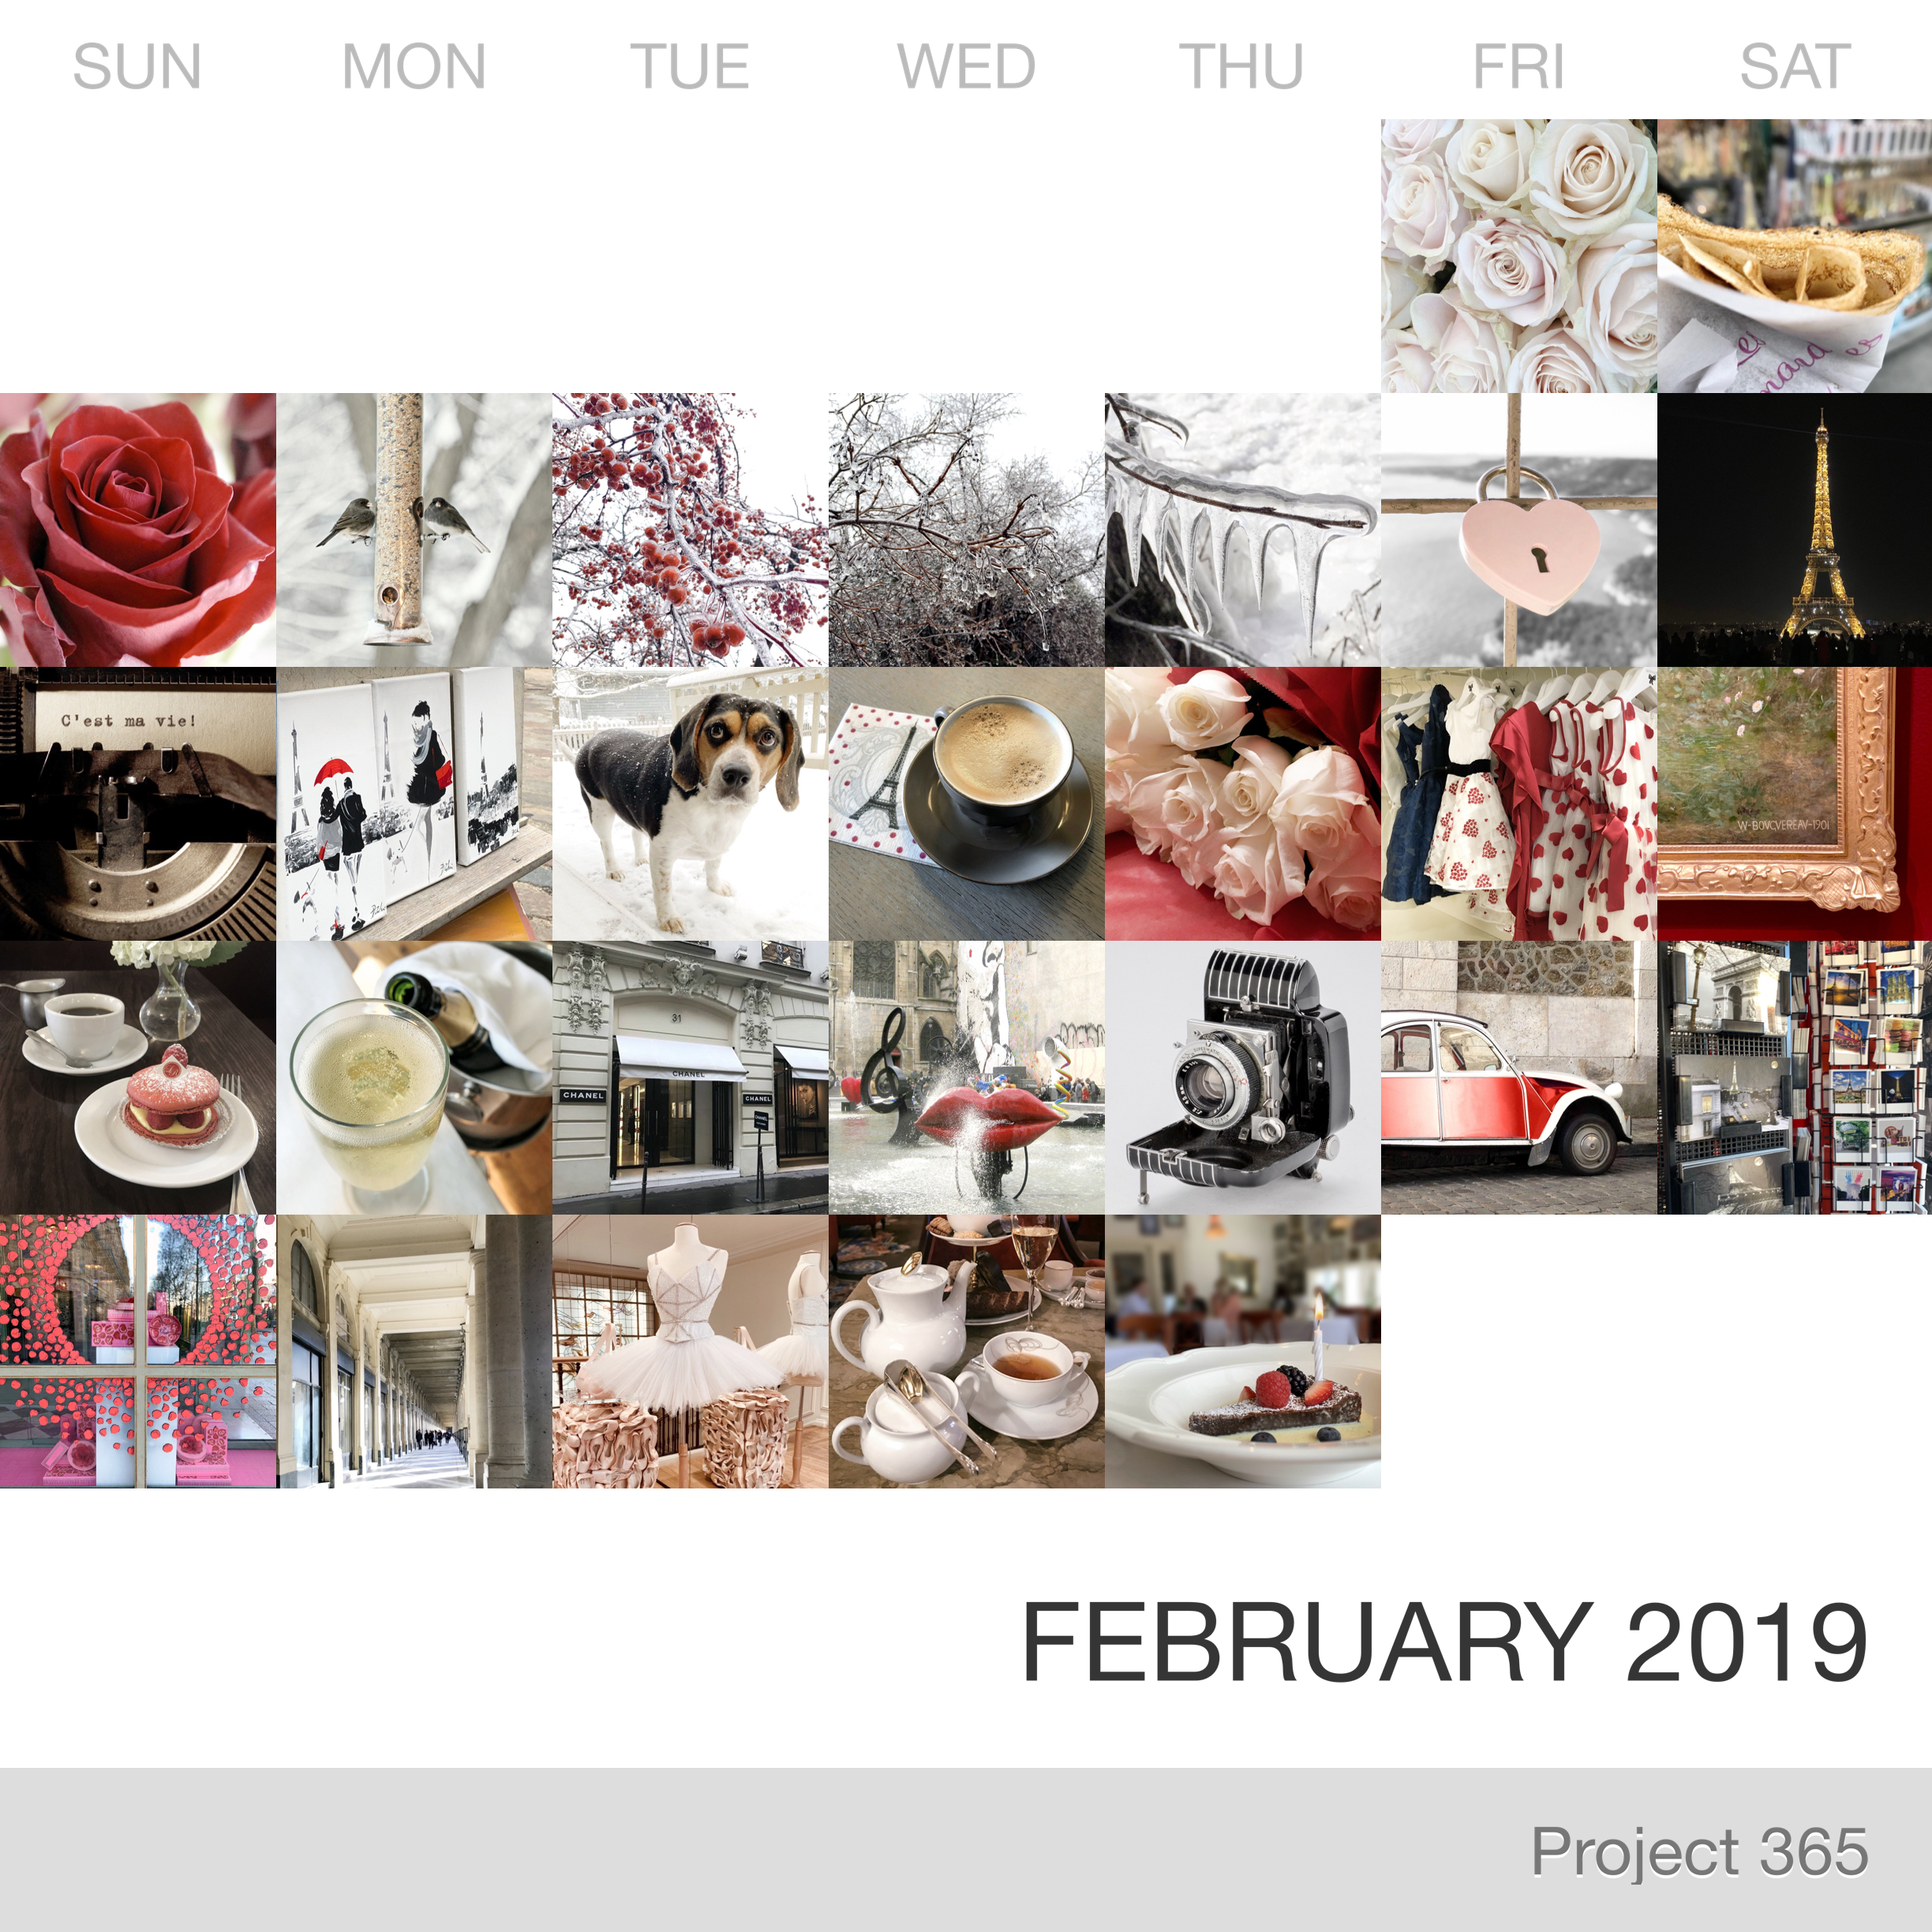 Project 365 _February-2019_Collage 2.jpg